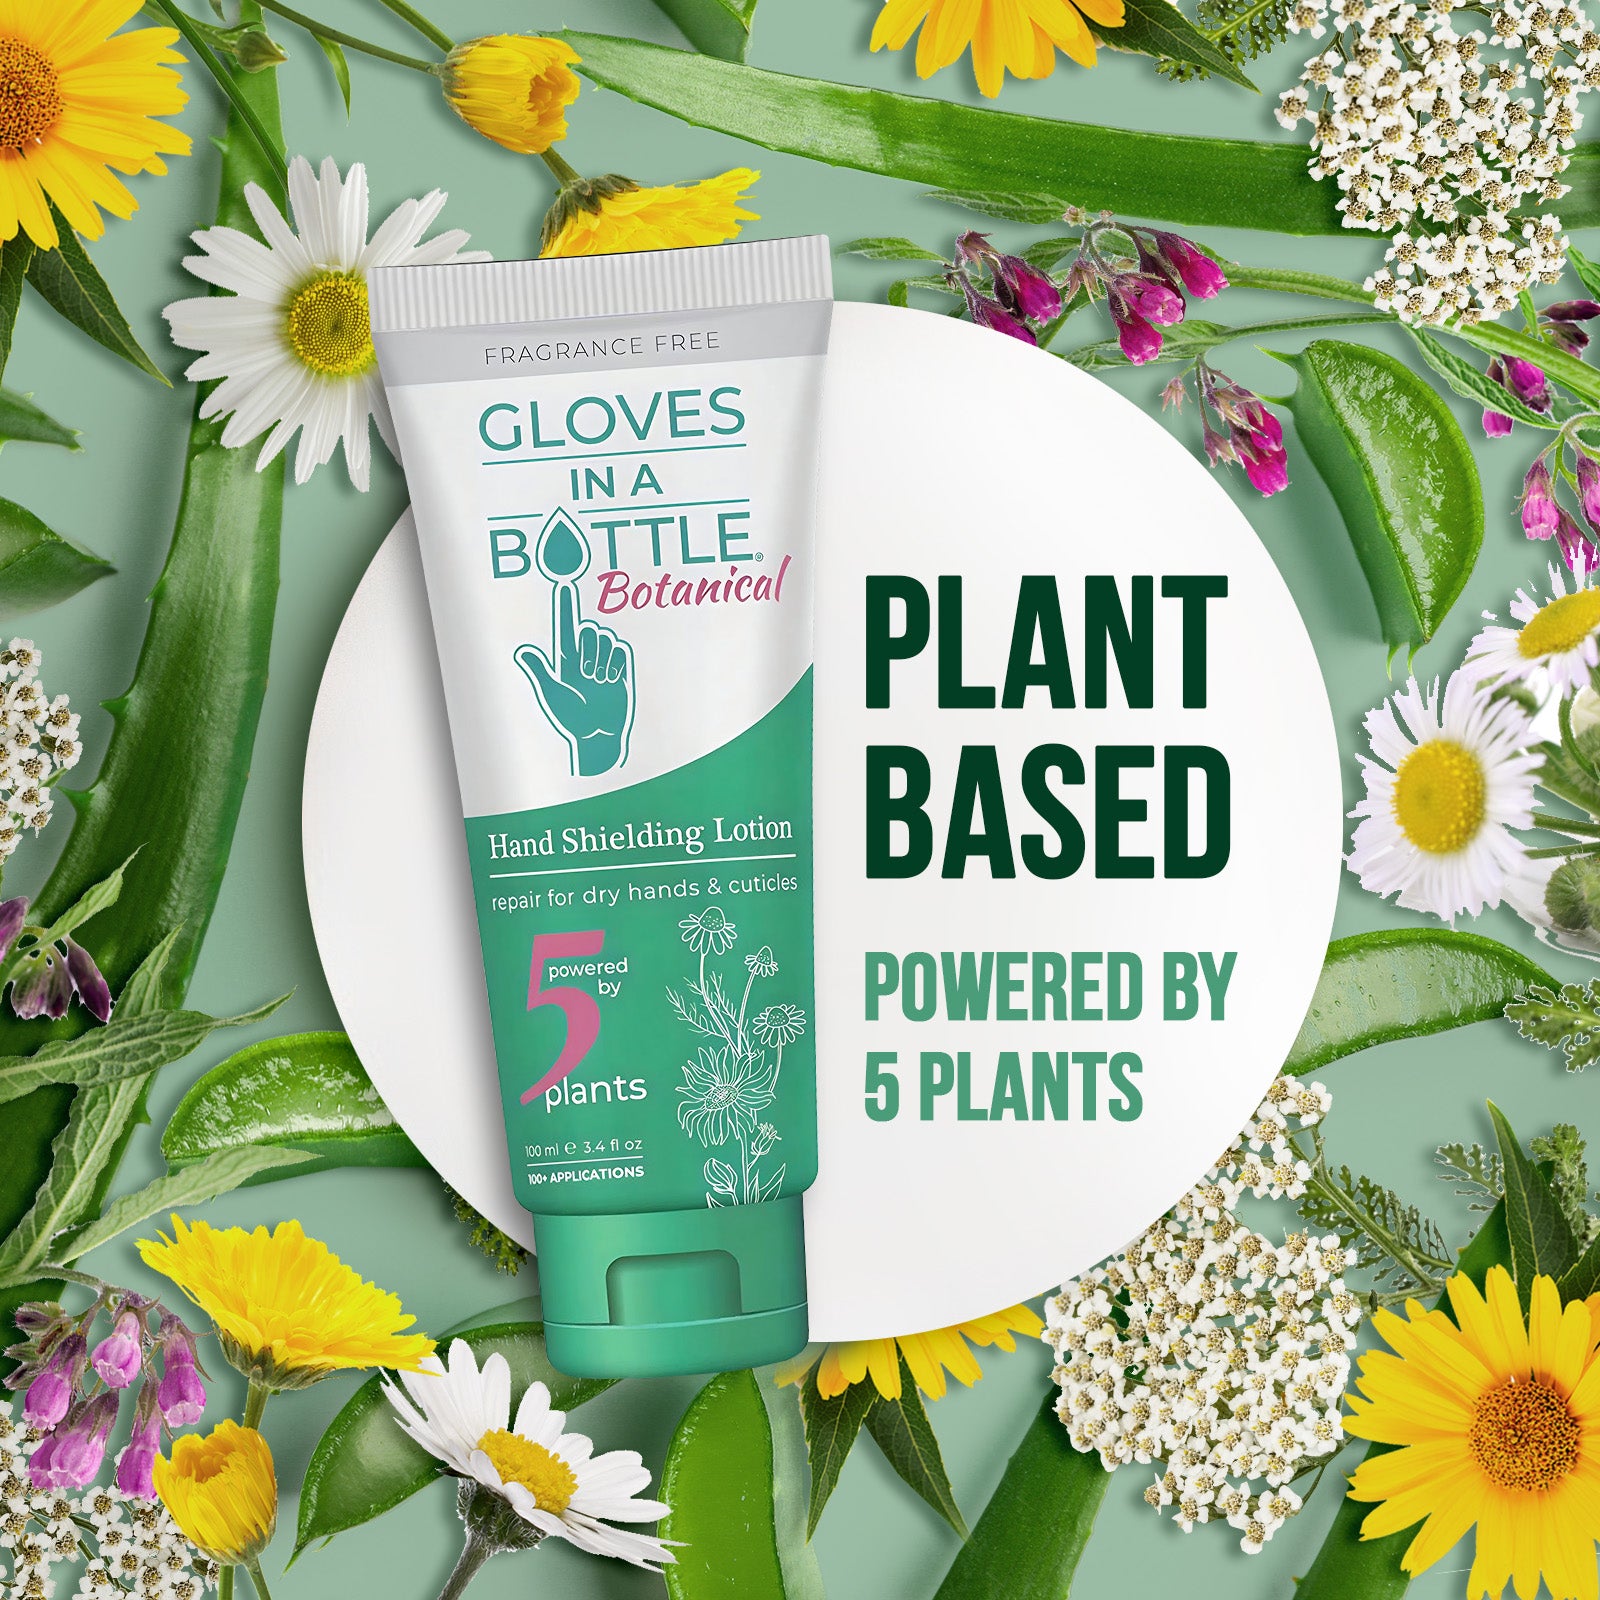 Gloves In A Bottle Hand Shielding Lotion, Botanical and Regular